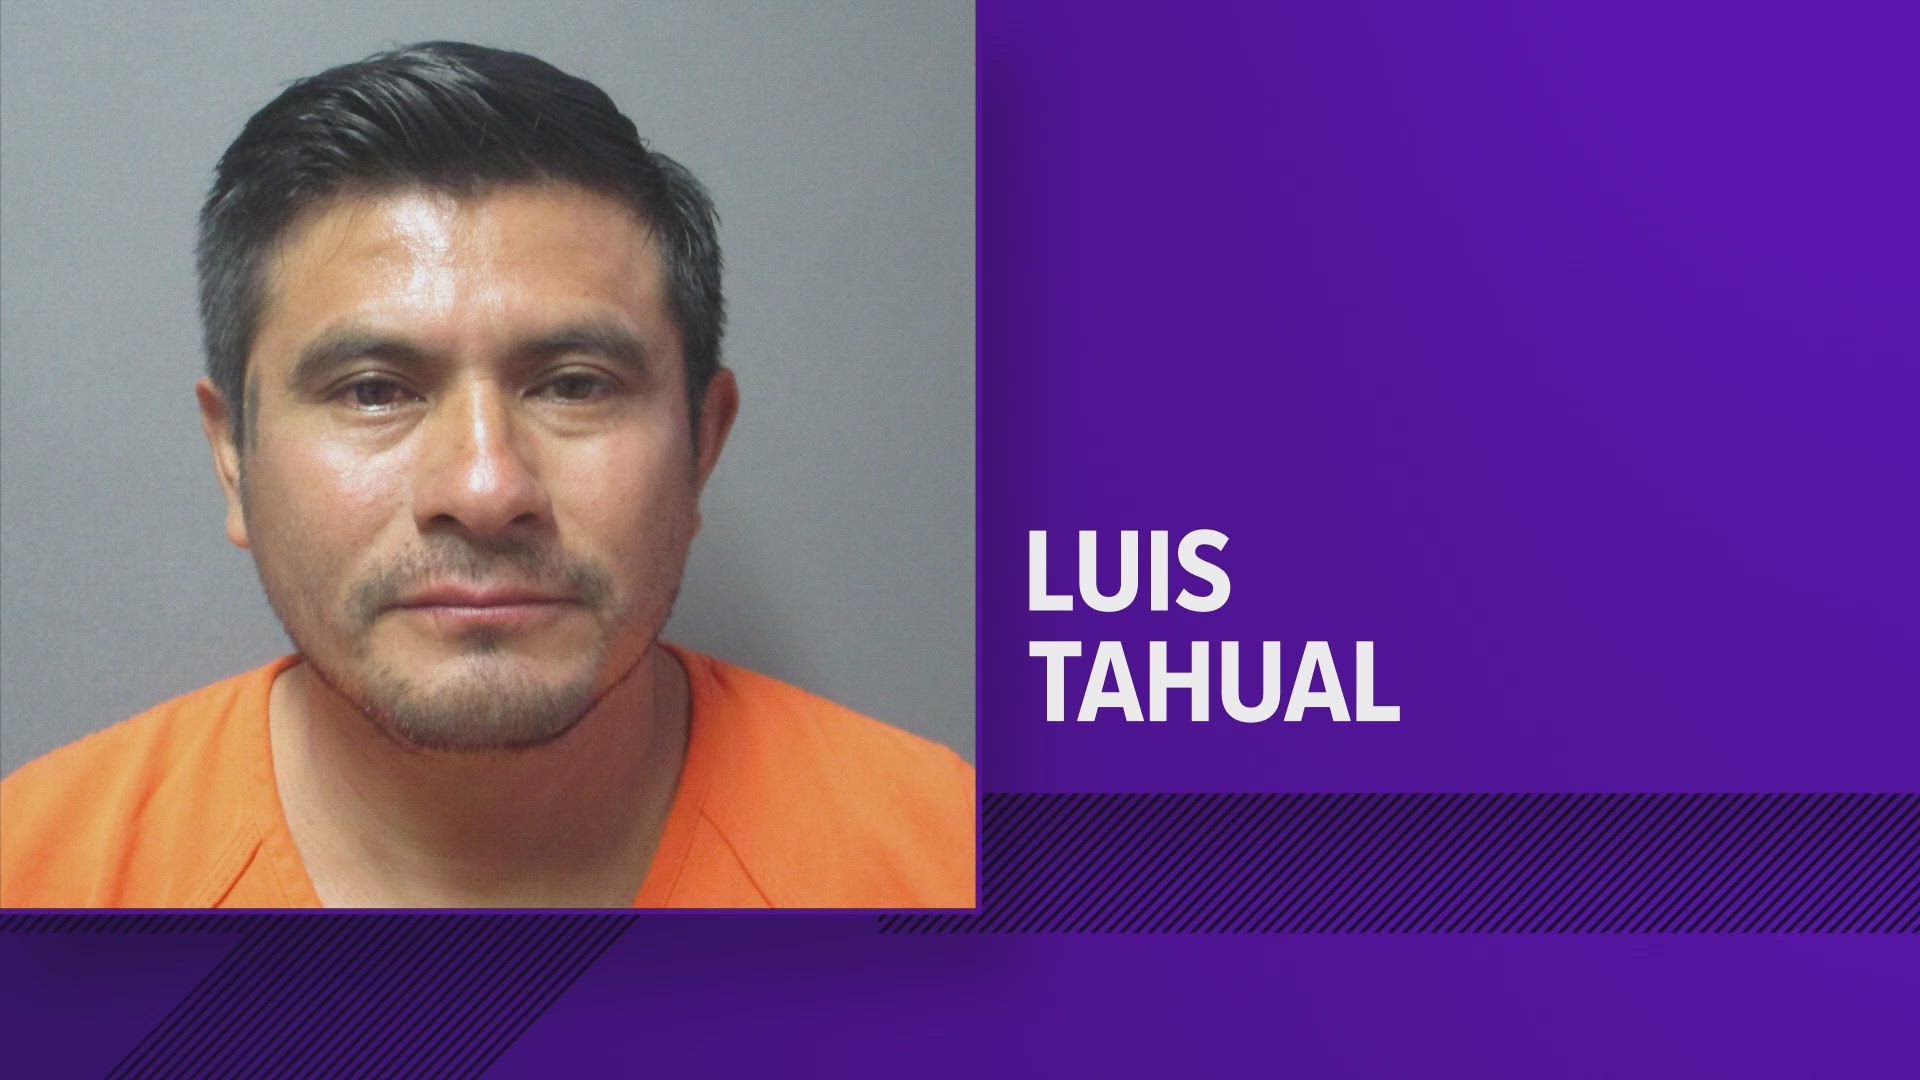 Luis Chacaj Tahual was arrested and has been charged with tampering with or fabricating evidence with intent to impair.